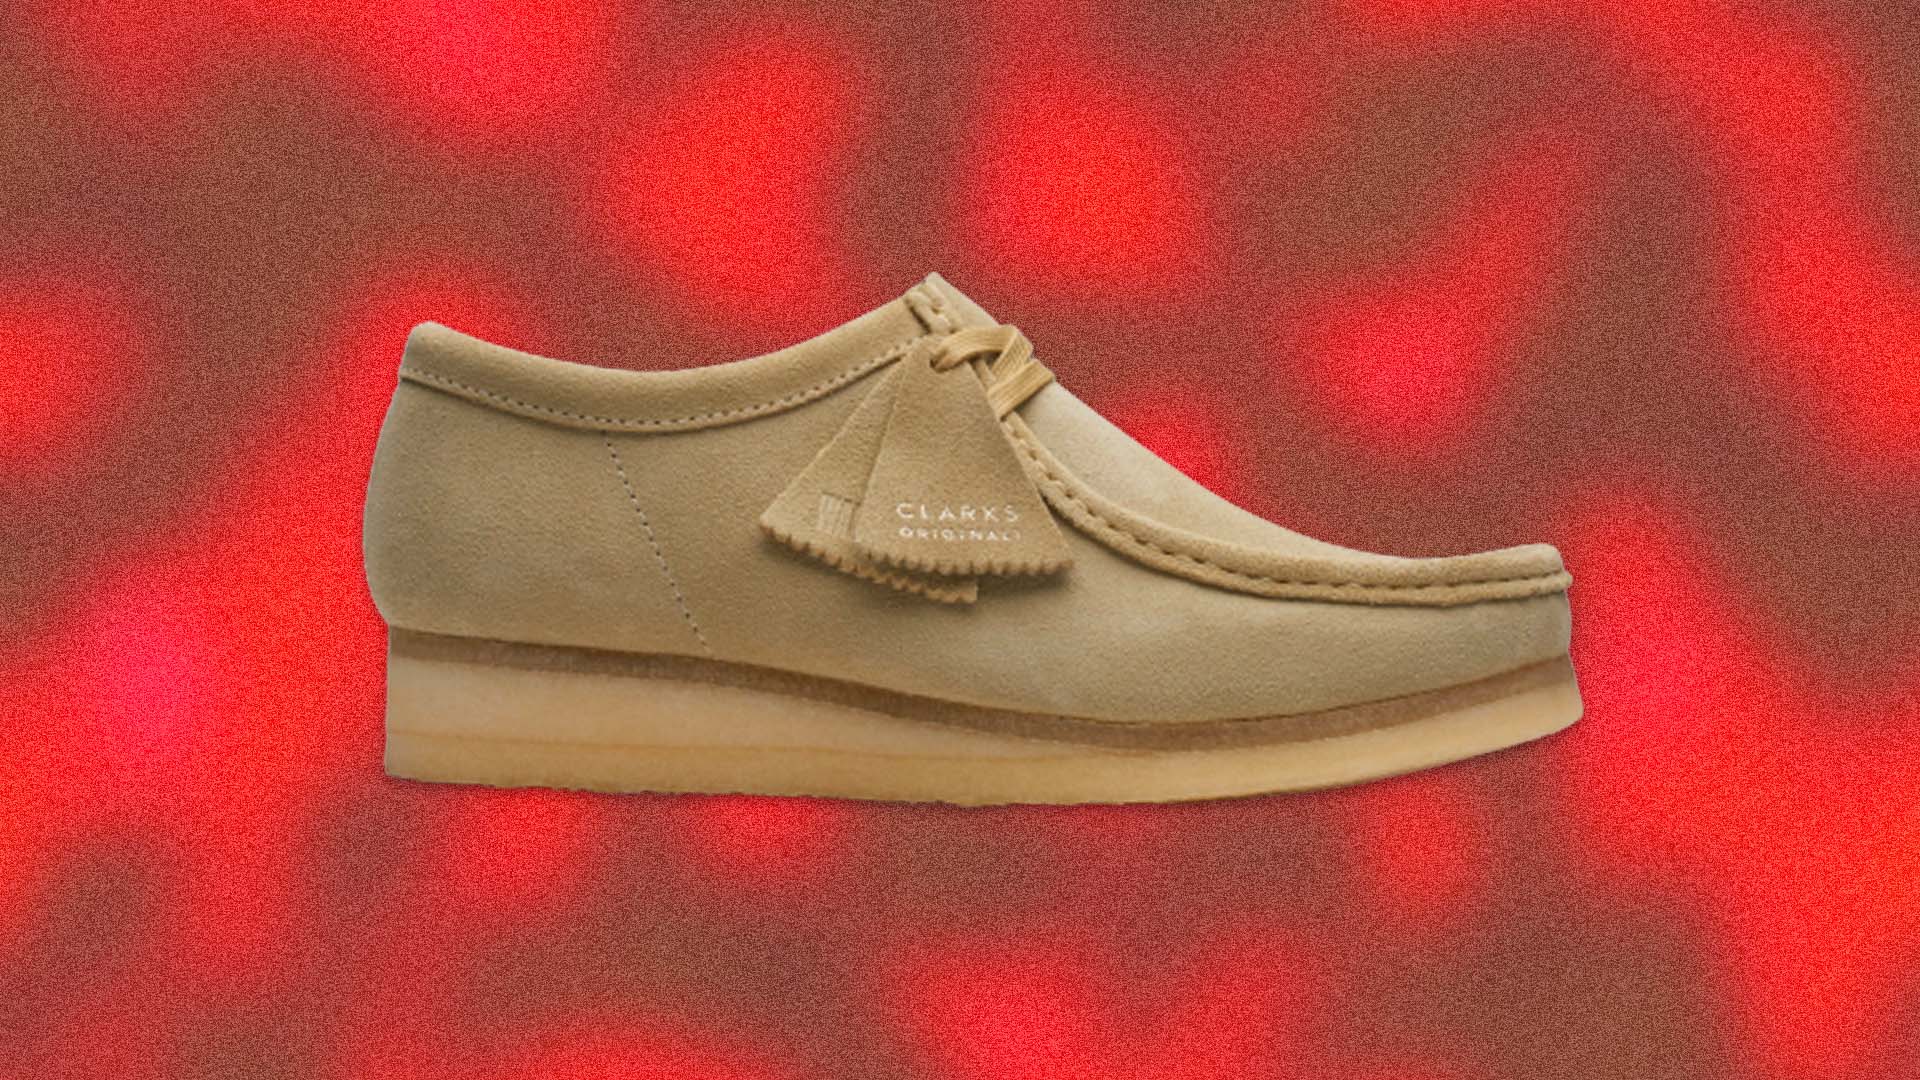 Review: The Clarks the Perfect Alternative to Sneakers